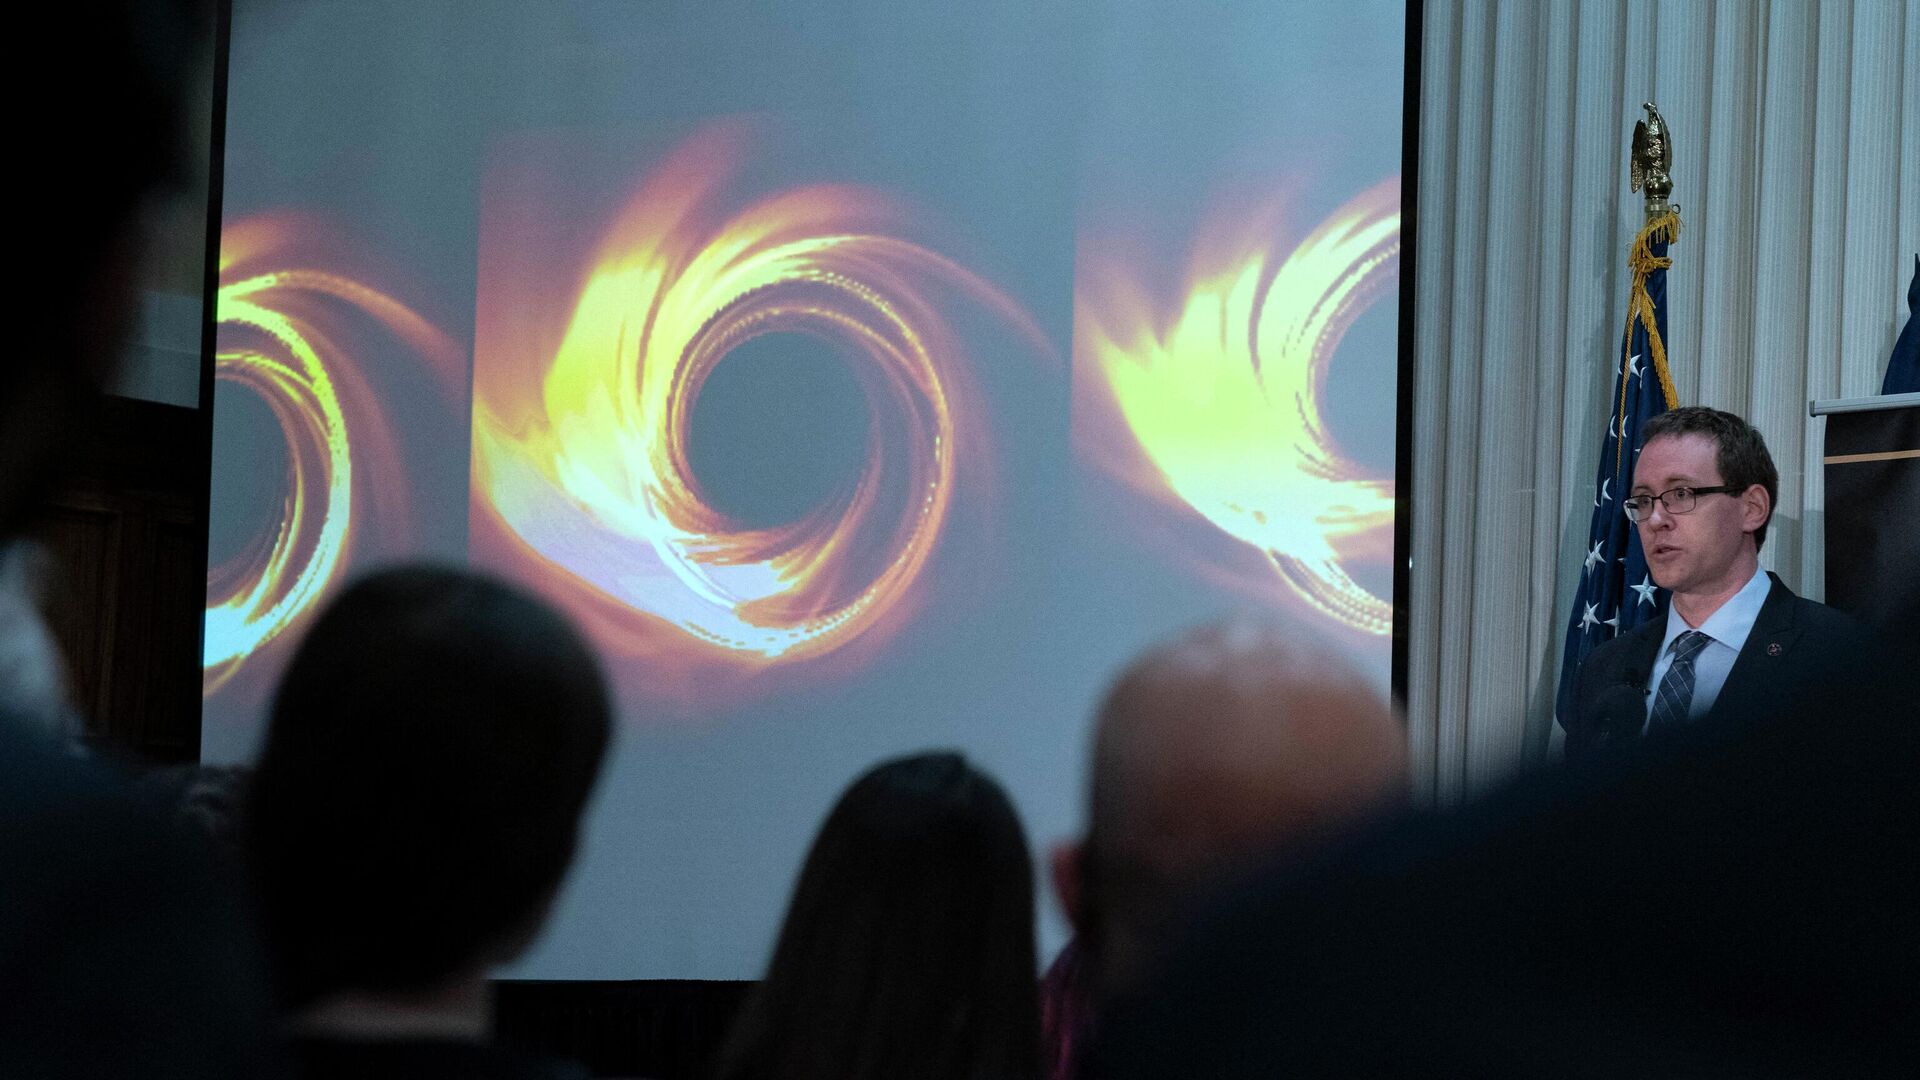 Astrophysicist at Center for Astrophysics Michael Johnson speaks during a news conference to announce the first image of Sagittarius A*, a supermassive black hole, at the center of the Milky Way Galaxy, in Washington, DC, on May 12, 2022.  - Sputnik International, 1920, 12.05.2022